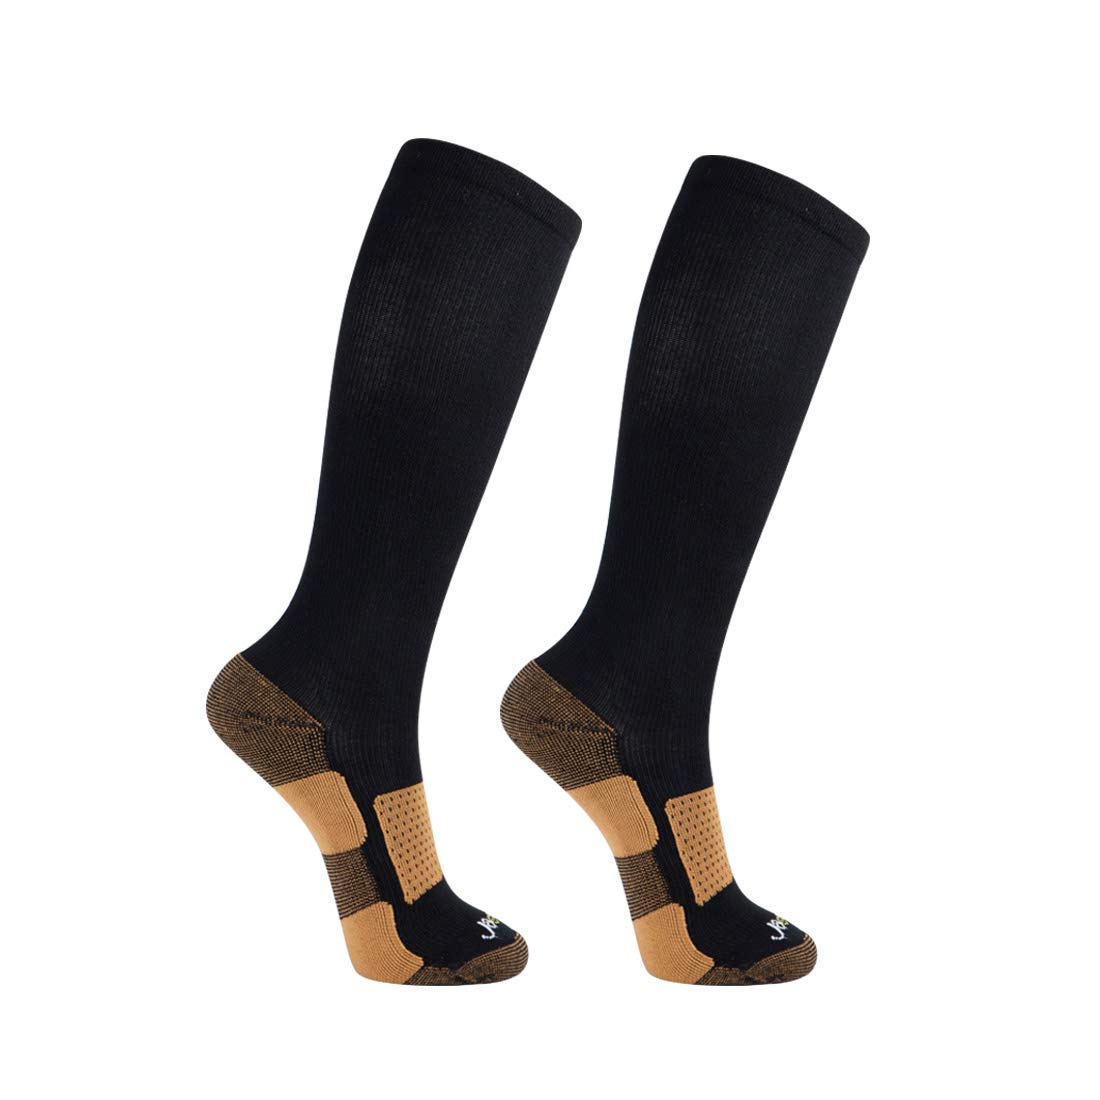 Black Compression Socks for People with Diabetes